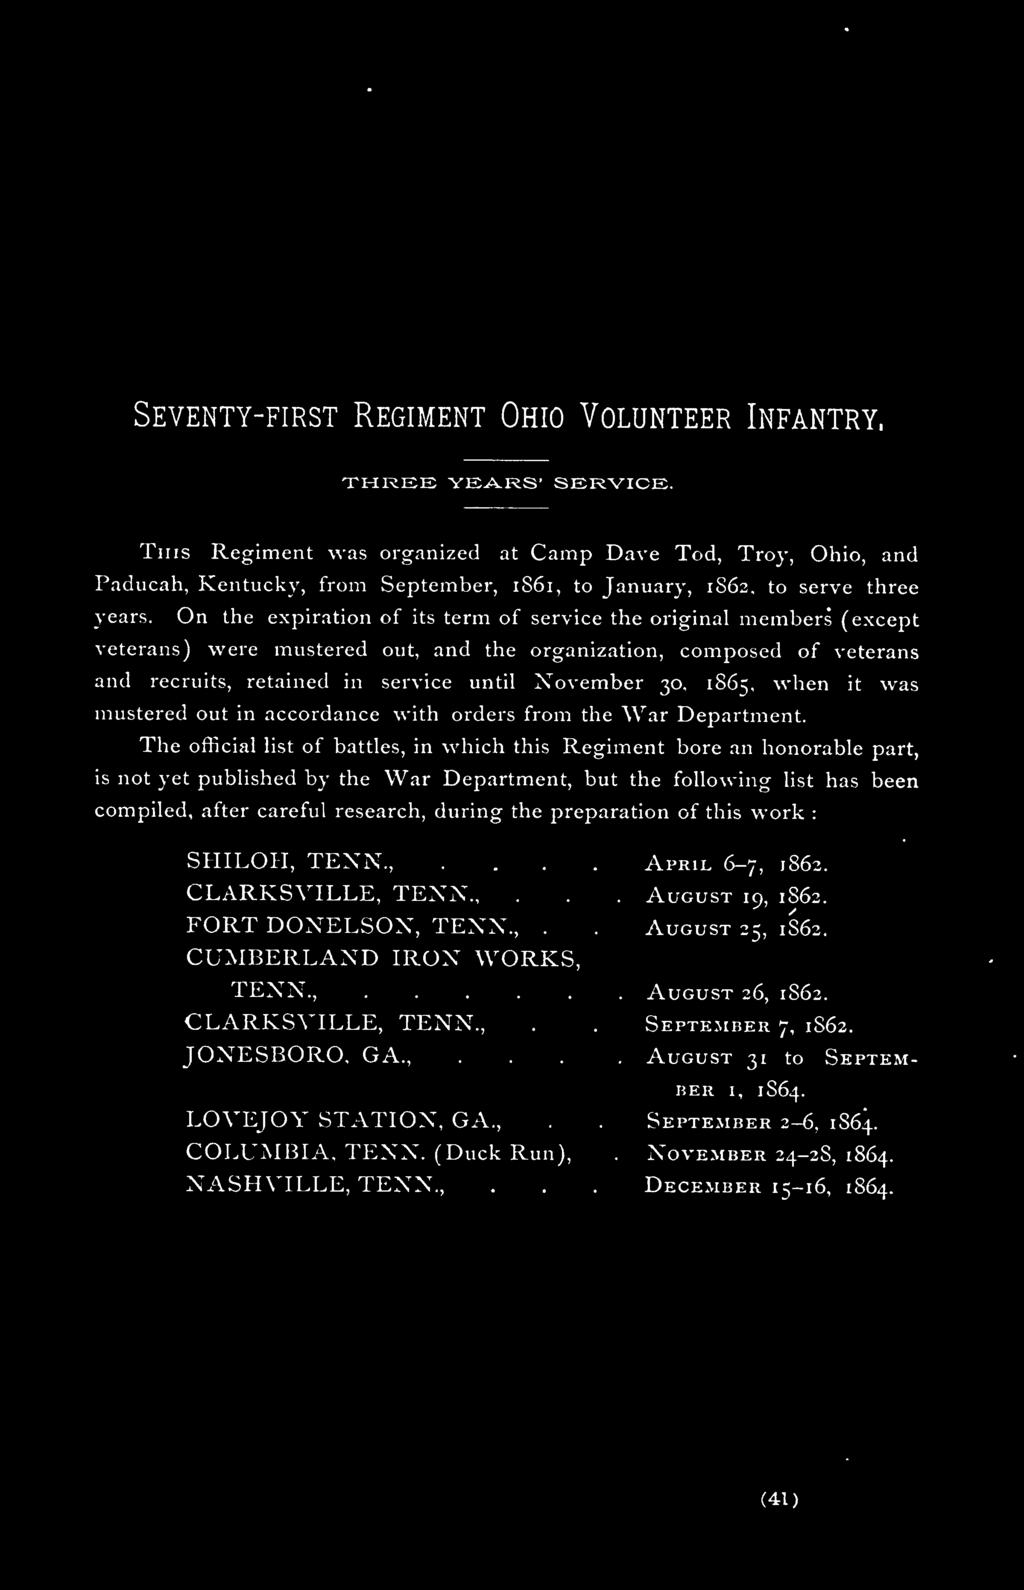 The official list of battles, in which this Regiment bore an honorable part, is not yet published by the War Department, but the following list has been compiled, after careful